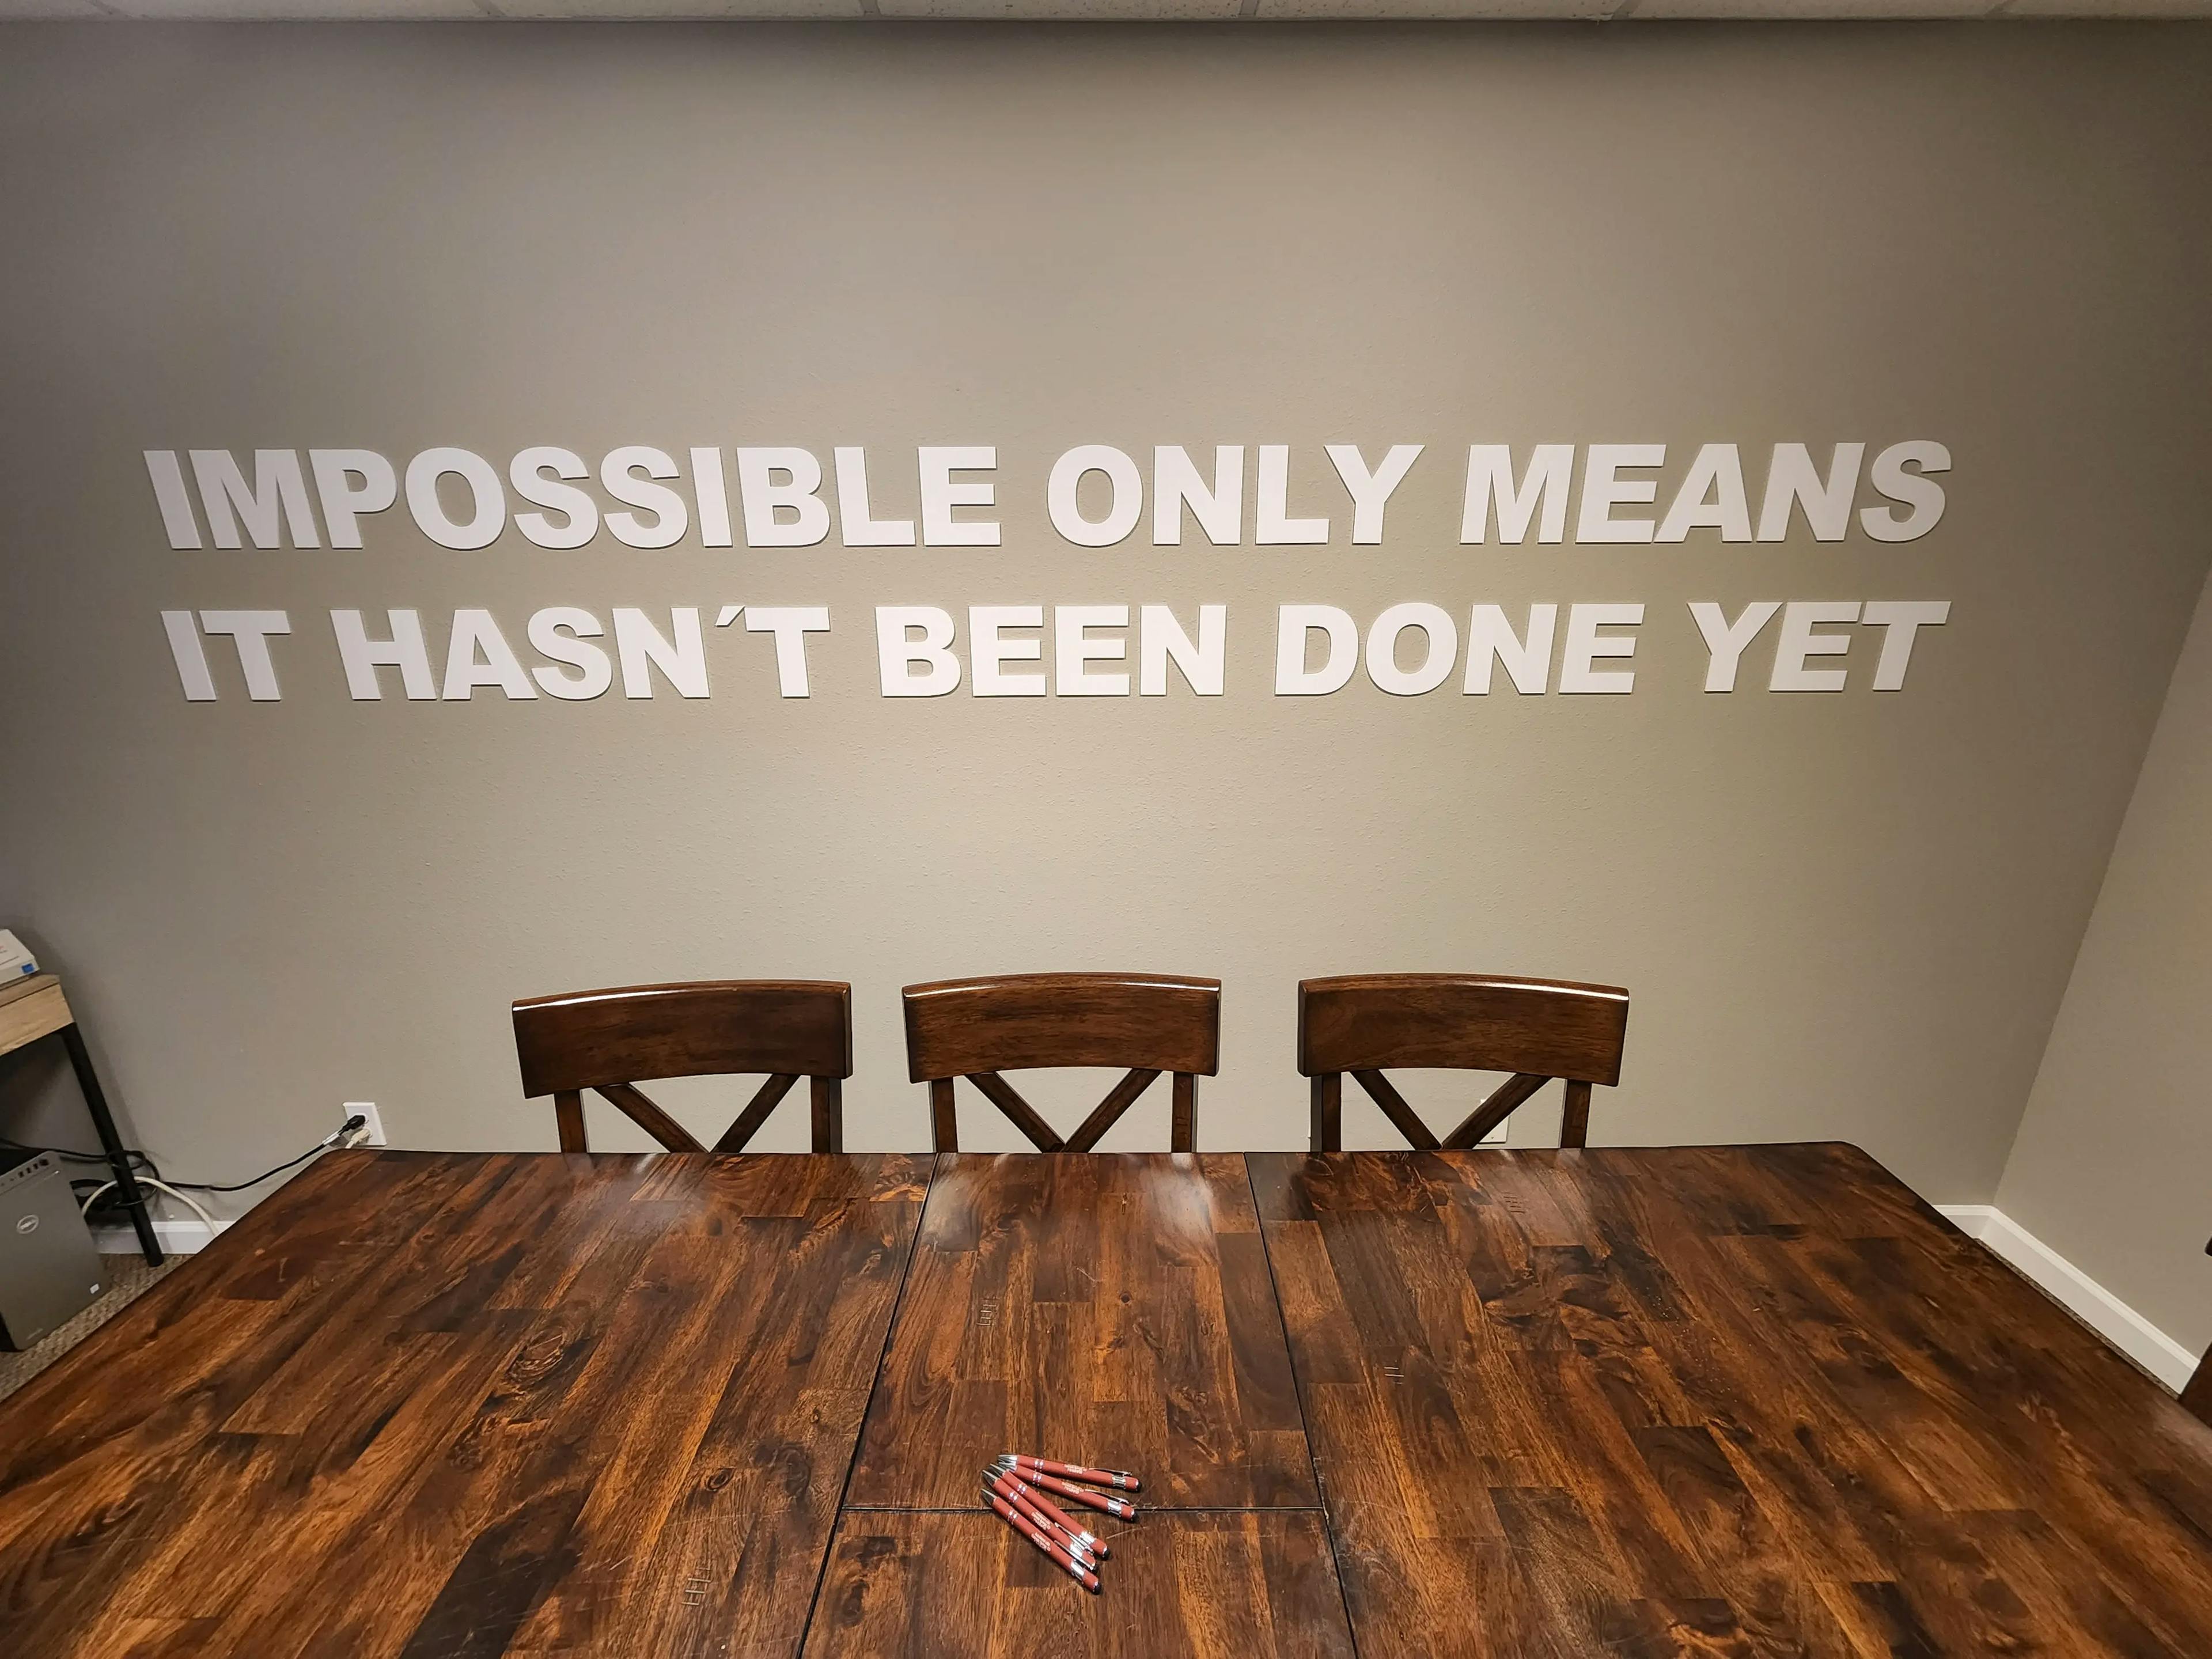 a wooden table with 3 chairs and a quote on the wall